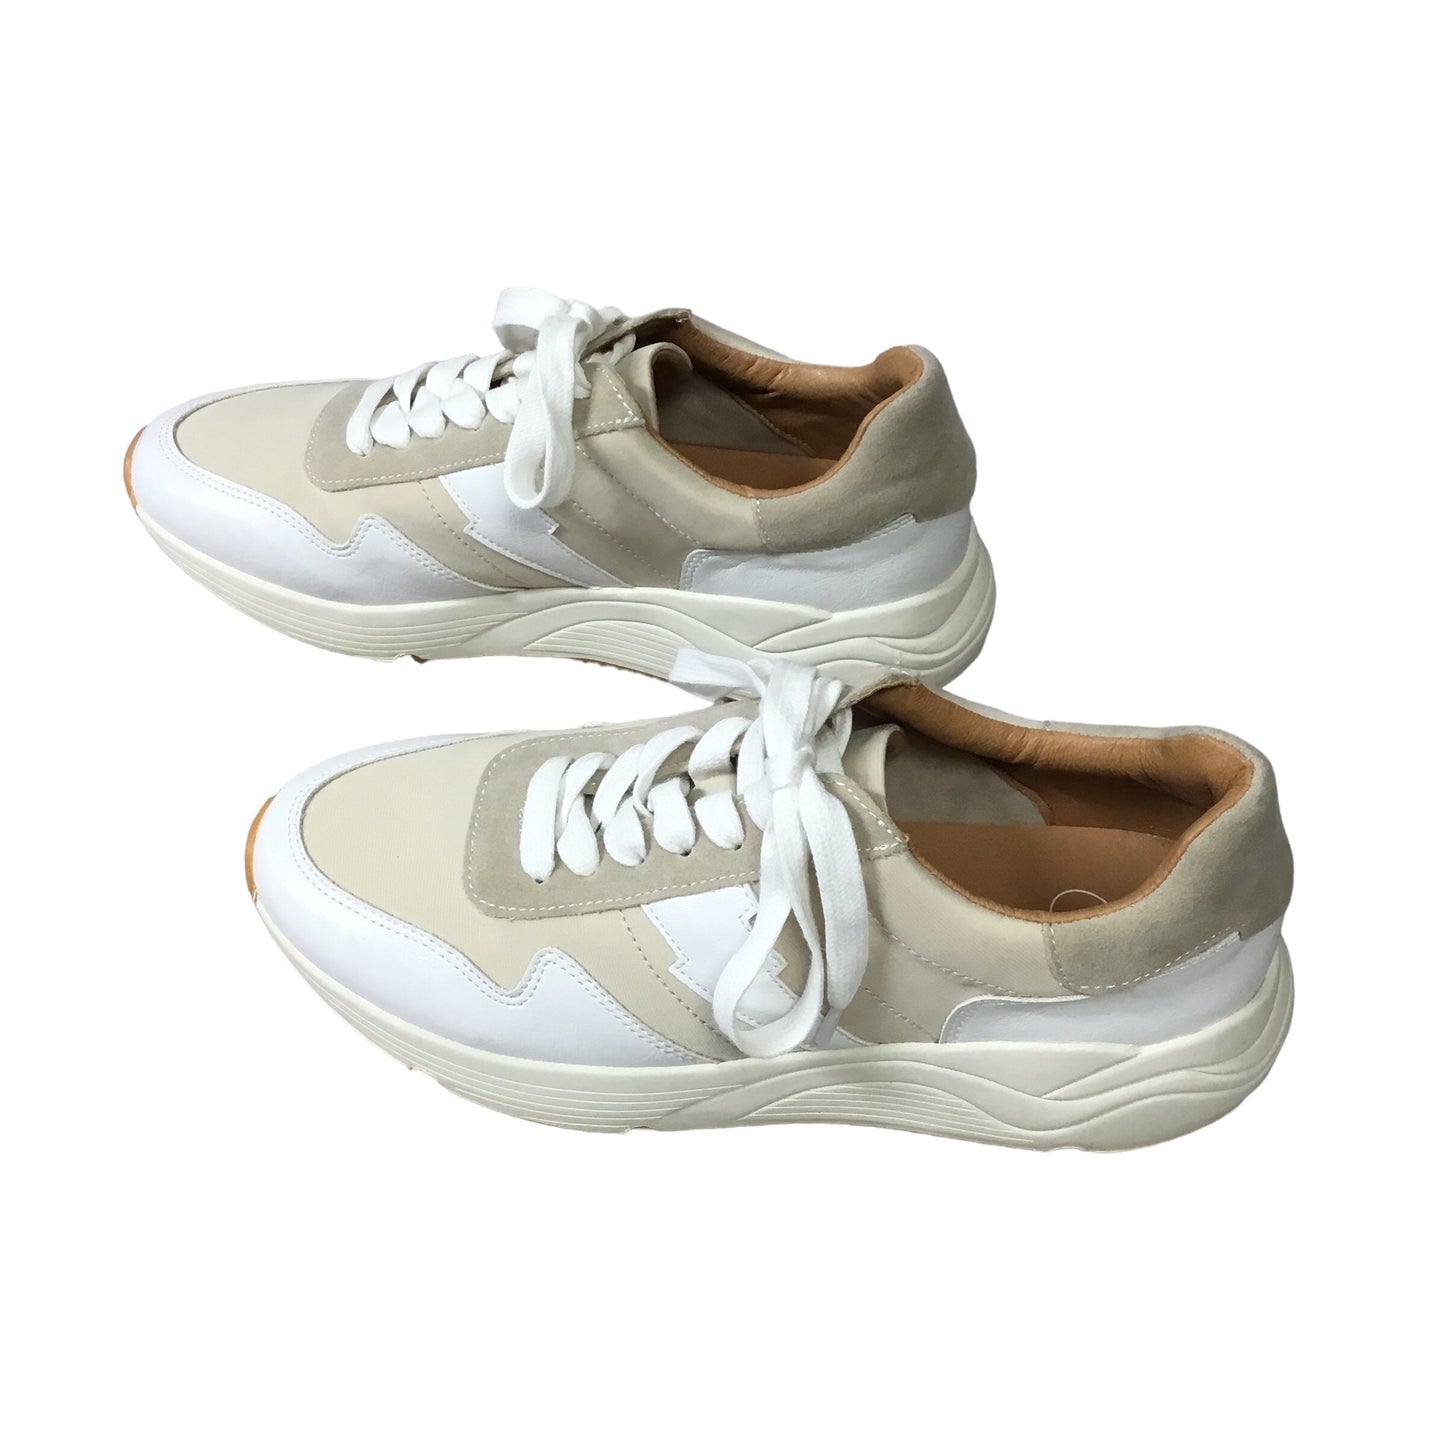 Cream & White Shoes Sneakers Clothes Mentor, Size 8.5